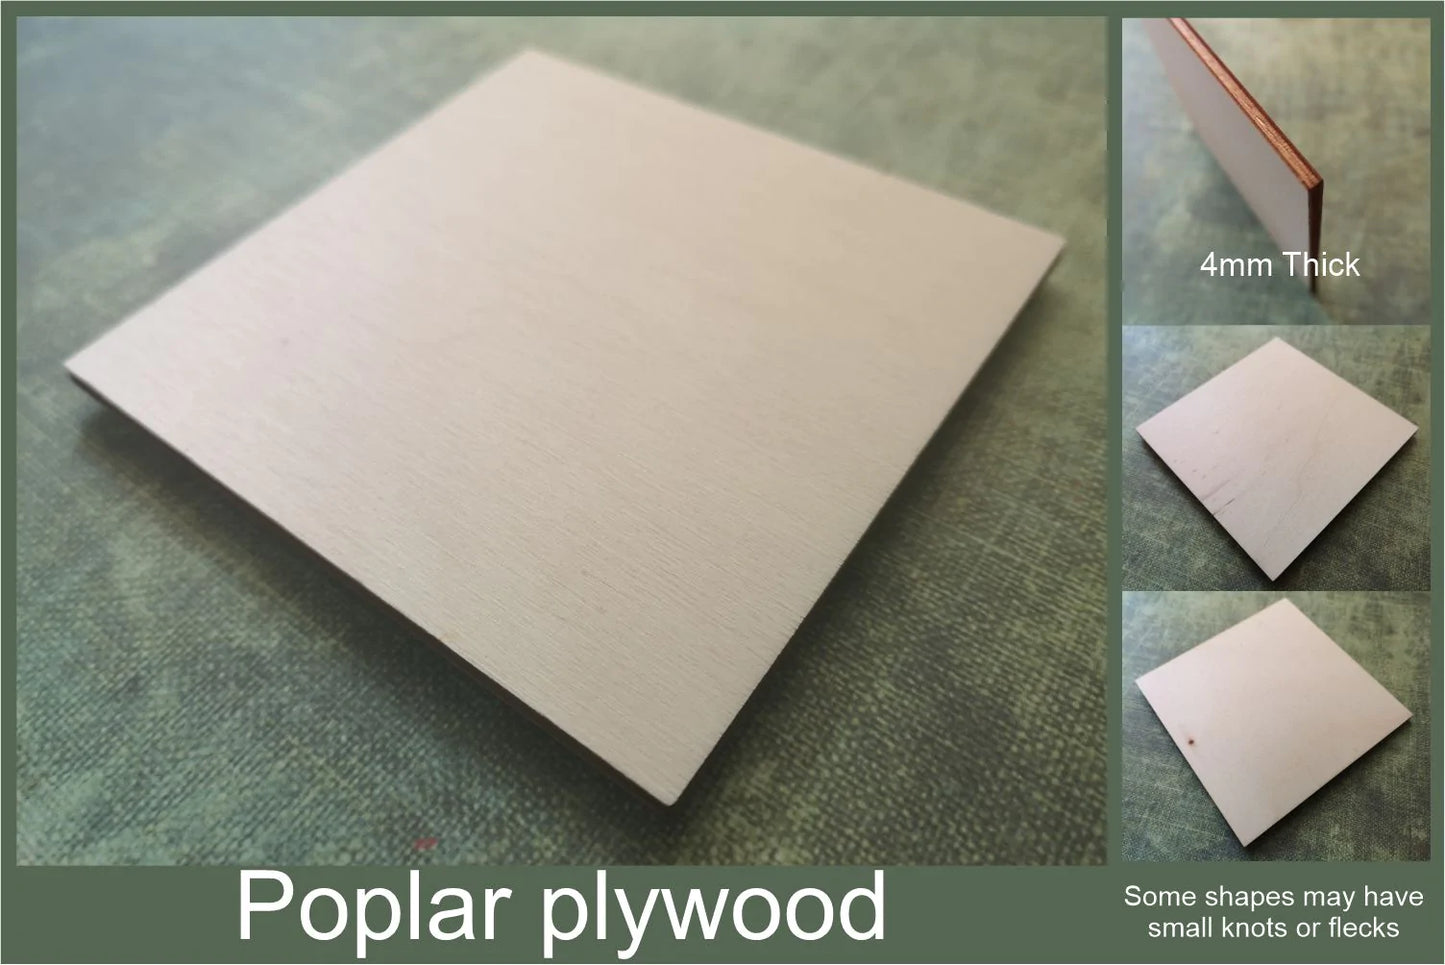 4mm thick poplar plywood used to make the Sporran cut-outs ready for crafting